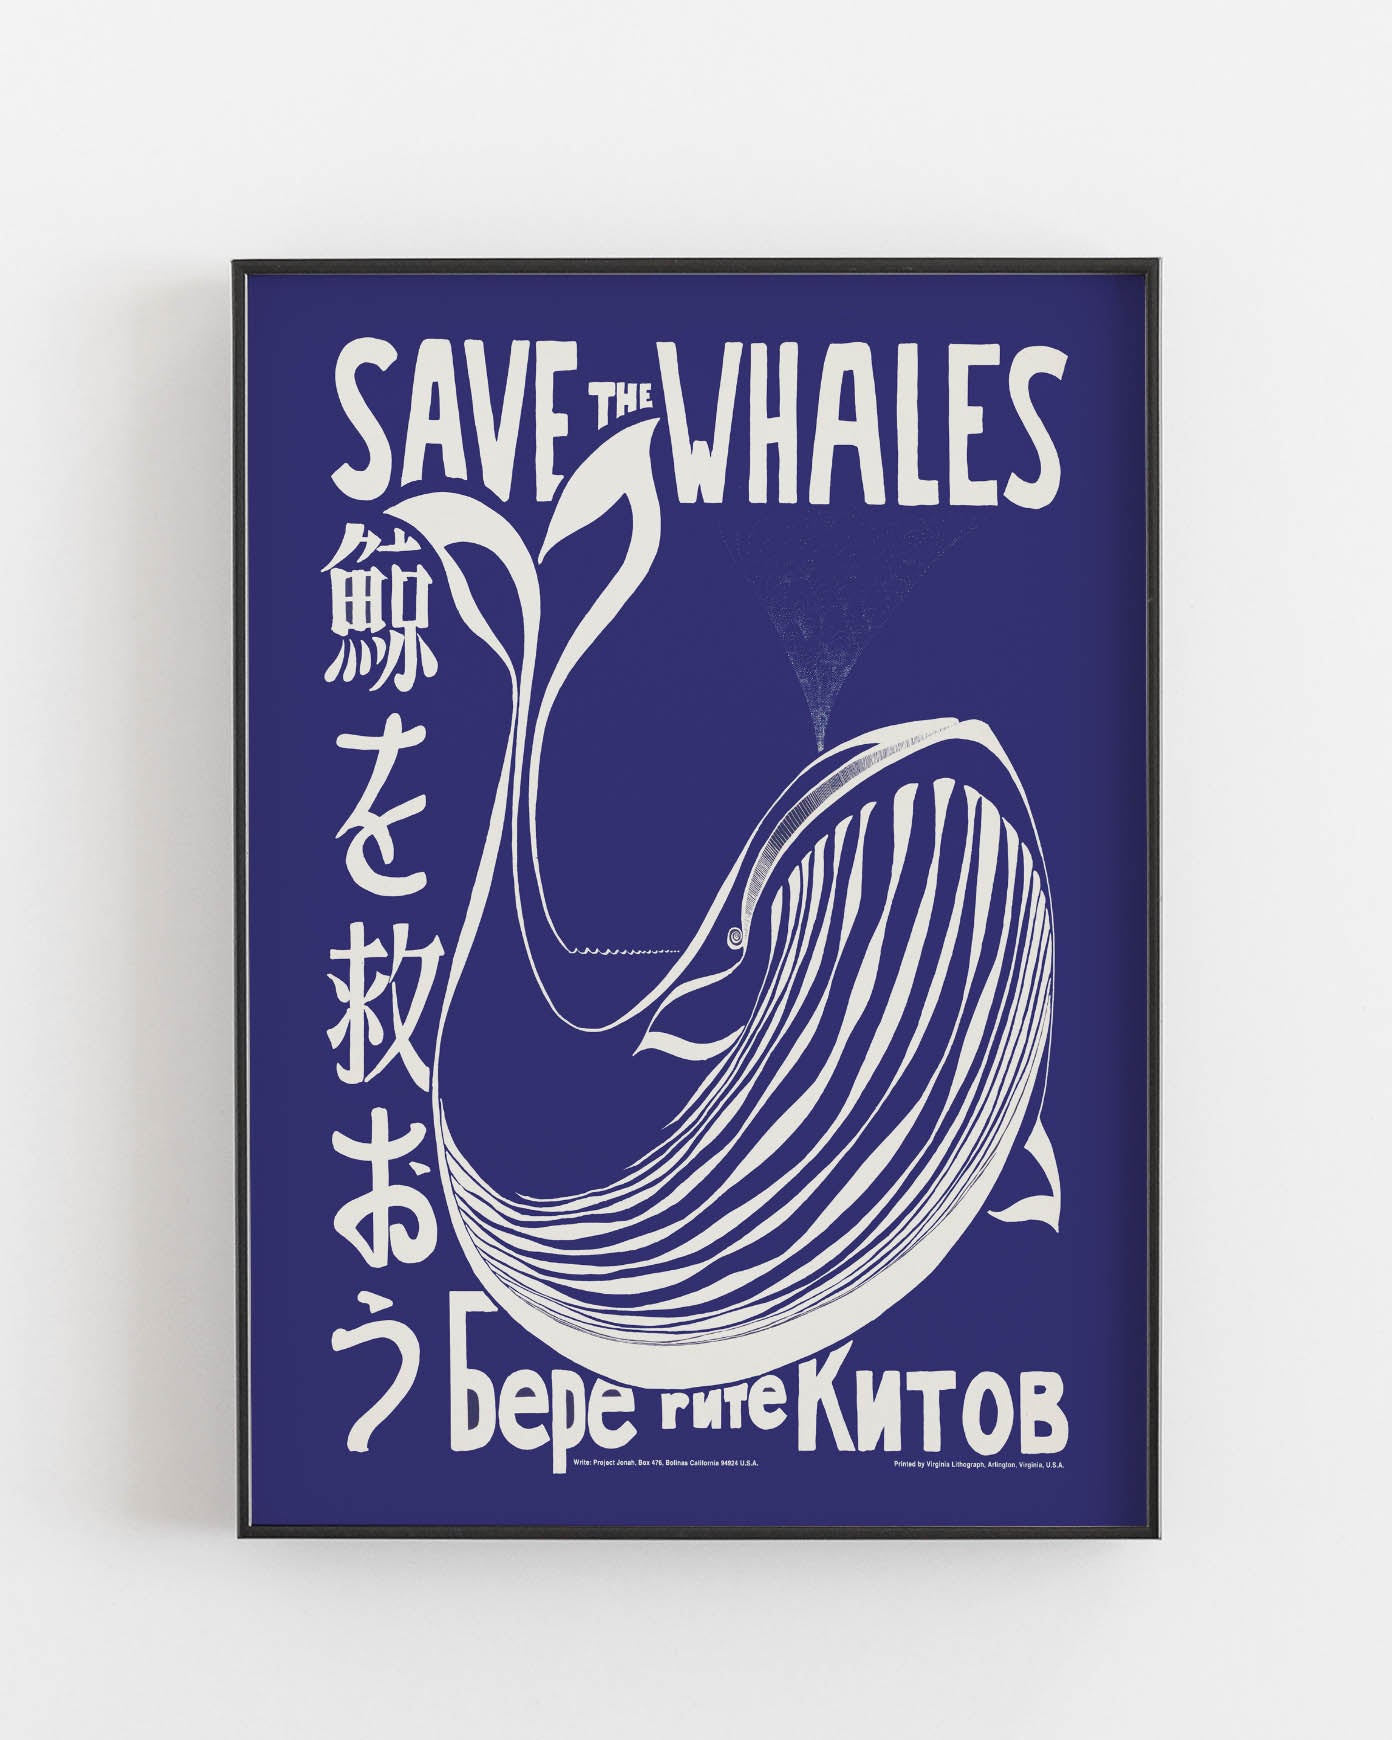 Save the whales poster